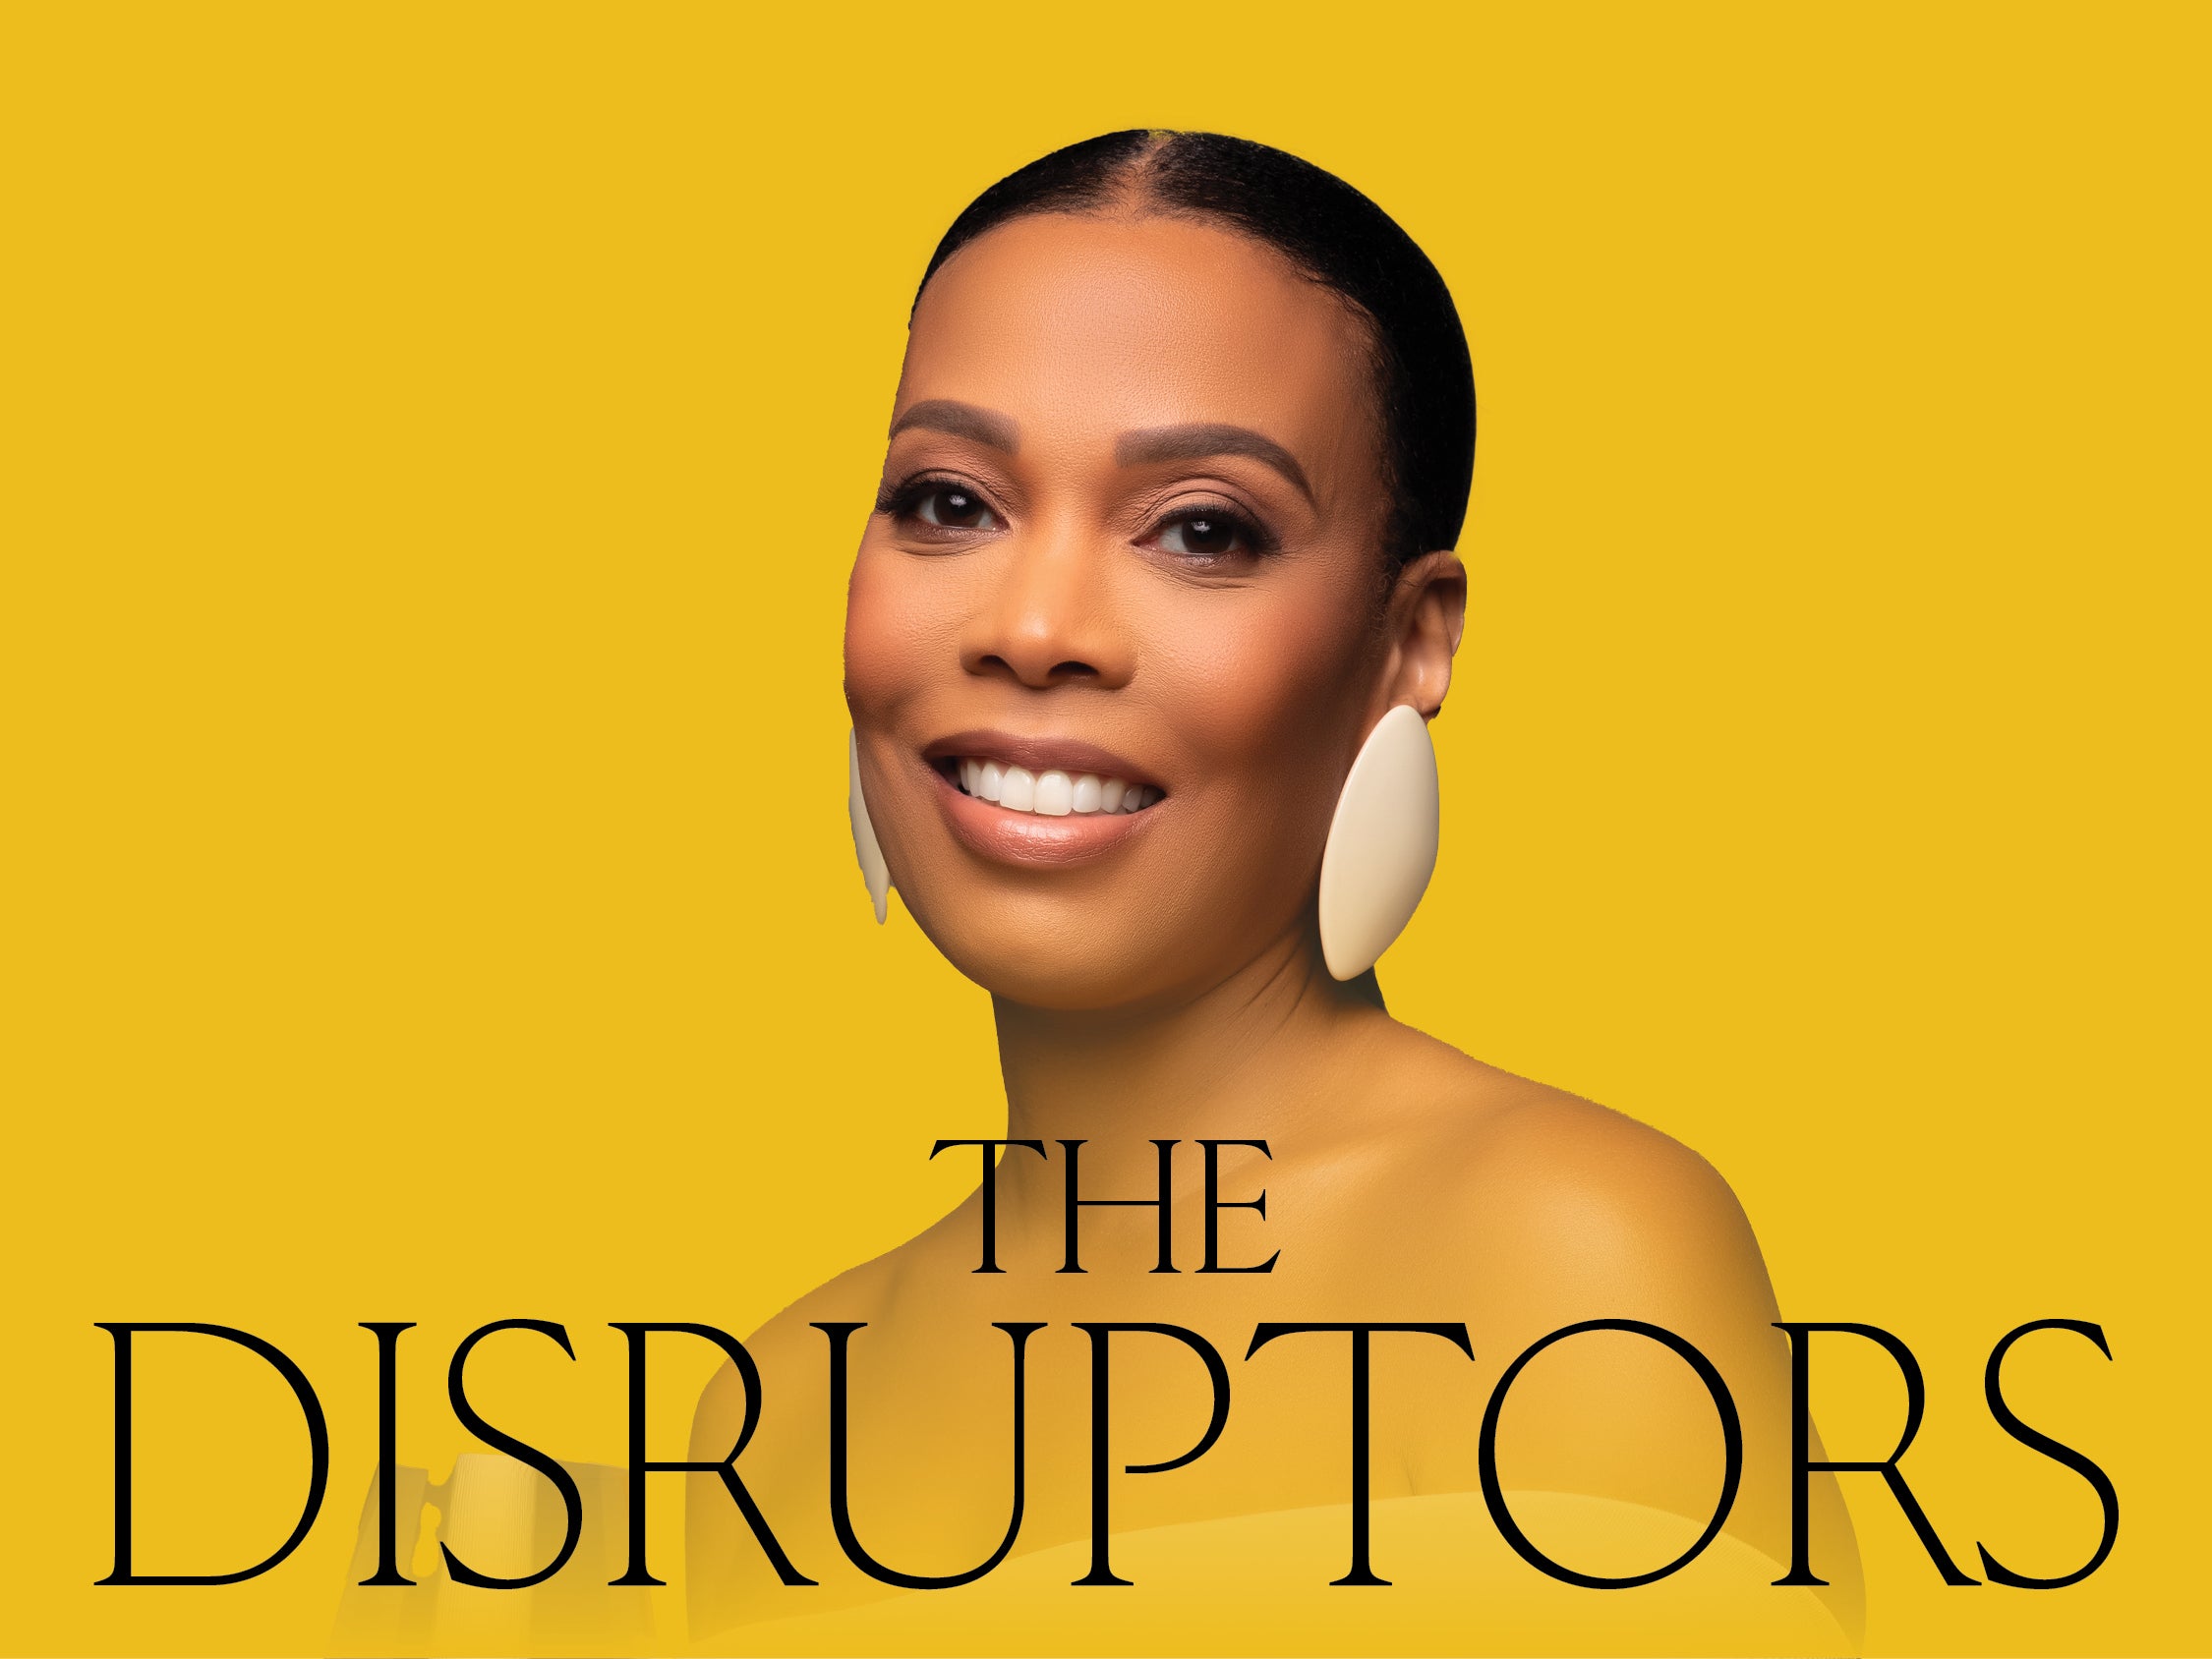 The Disruptors: When It Comes To Wine, Ingrid Knows Best